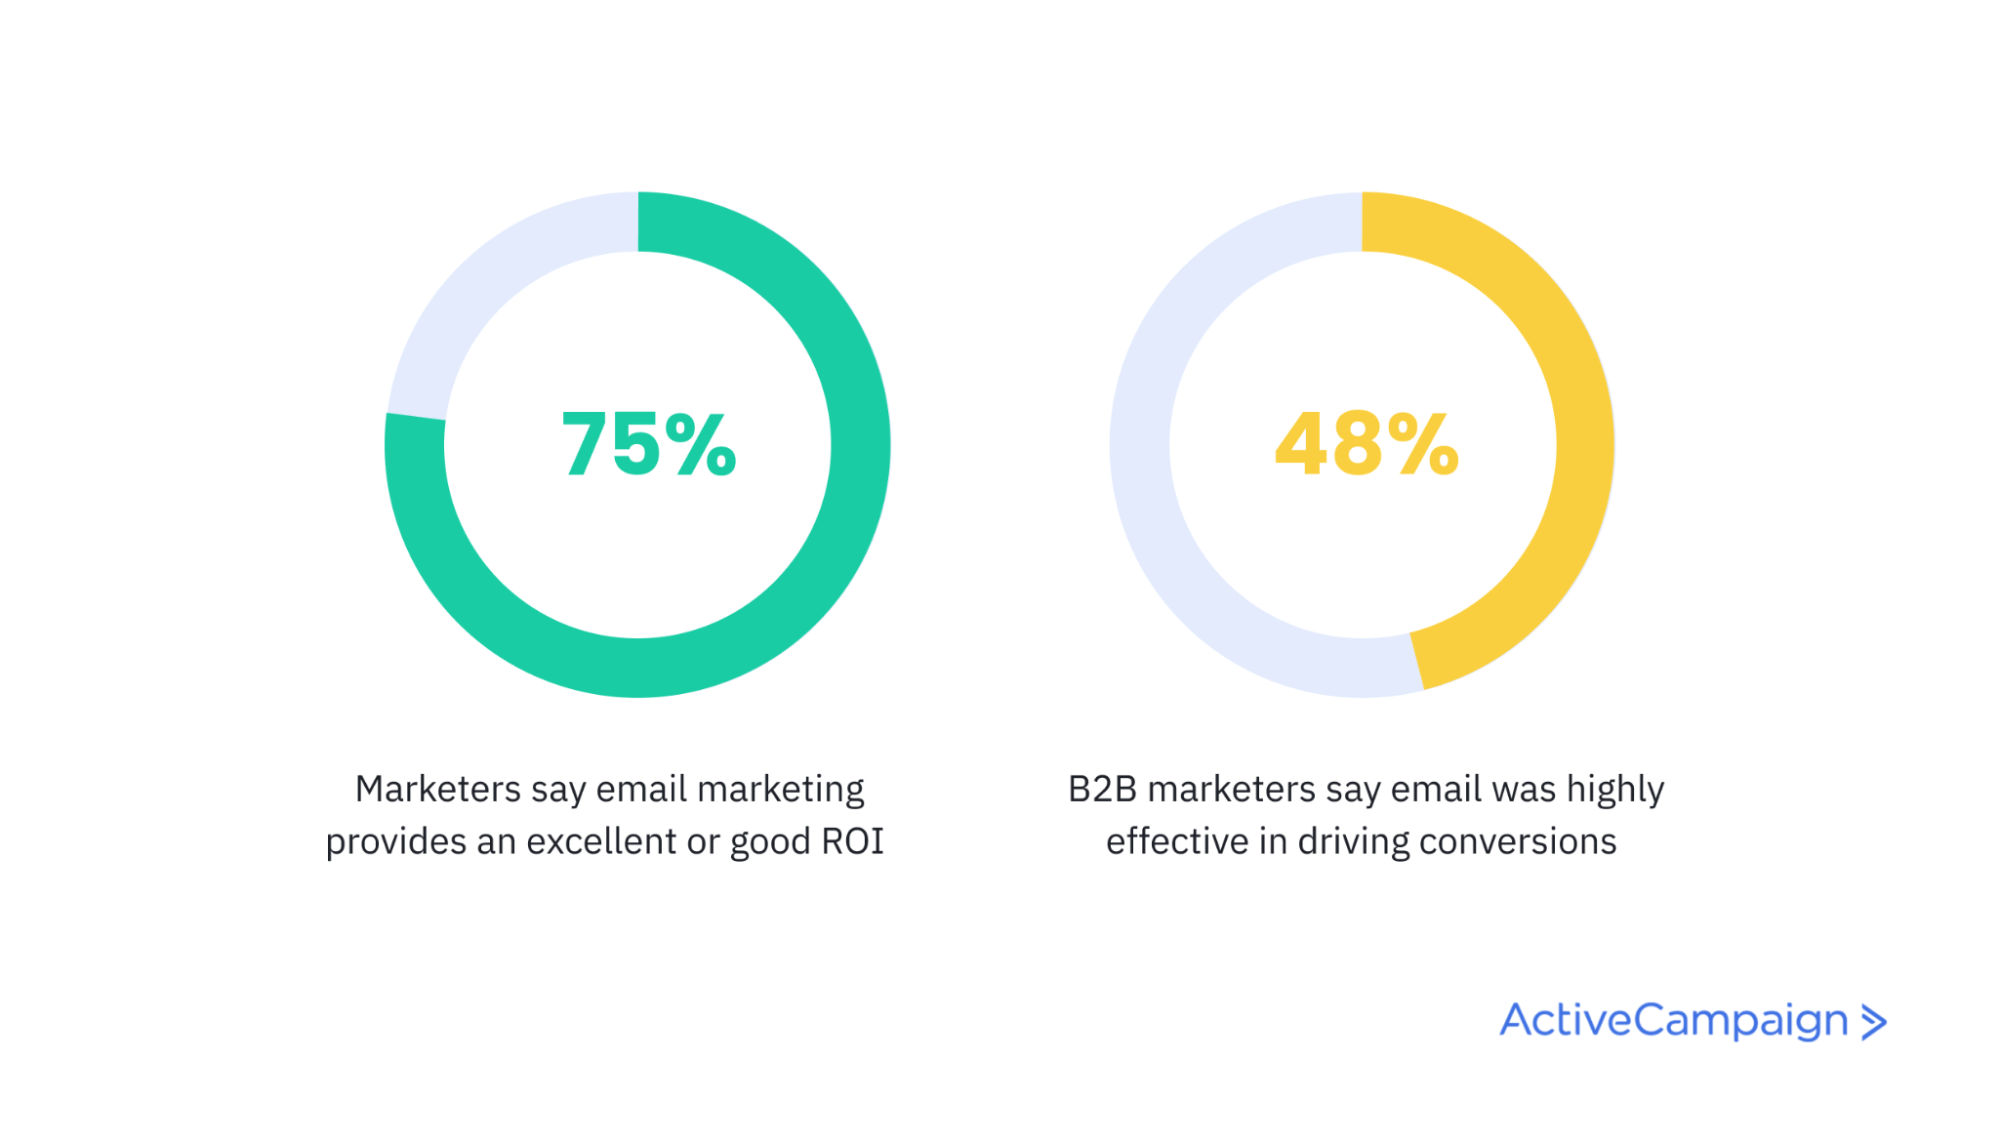 infographic stating 75% of marketers say email marketing provides excellent or good ROI